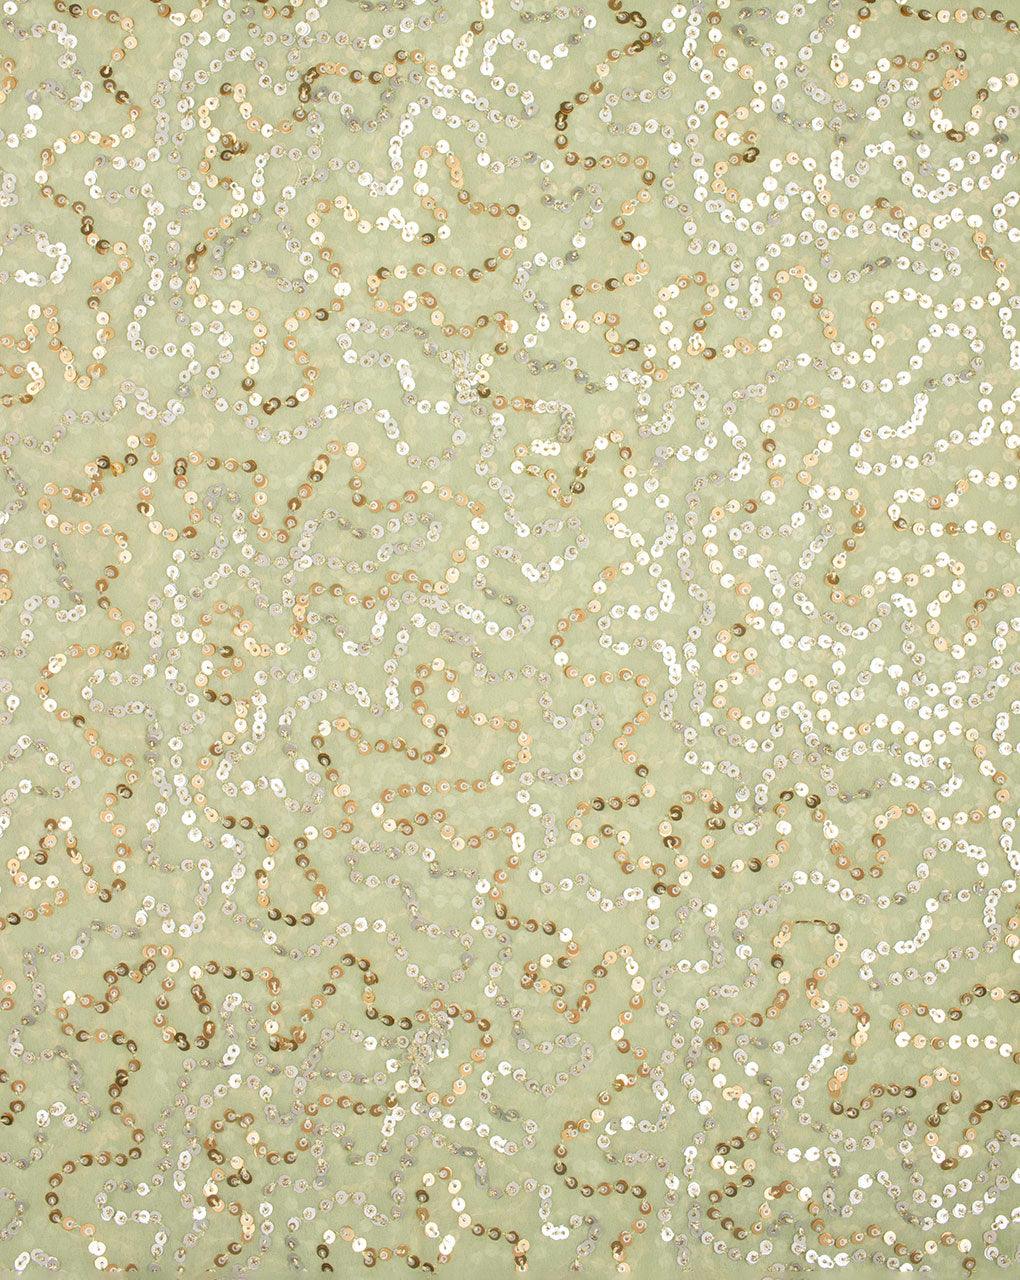 Embroidered Sequins Work Viscose Georgette Fabric - Fabriclore.com